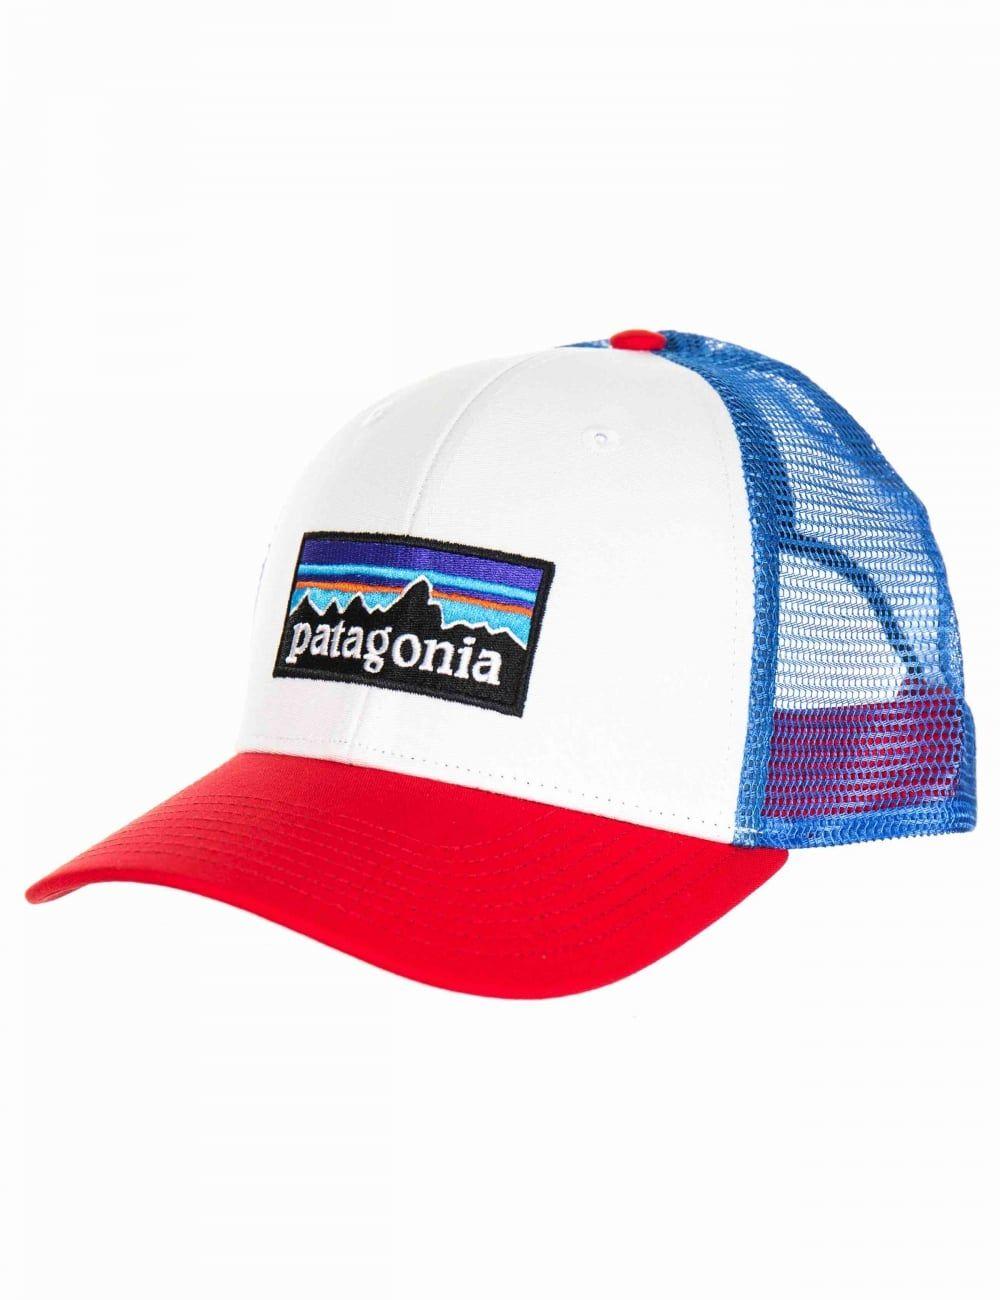 Red White and Blue Clothing Logo - Patagonia P-6 Logo Trucker Hat - White with Fire Red/Andes Blue ...